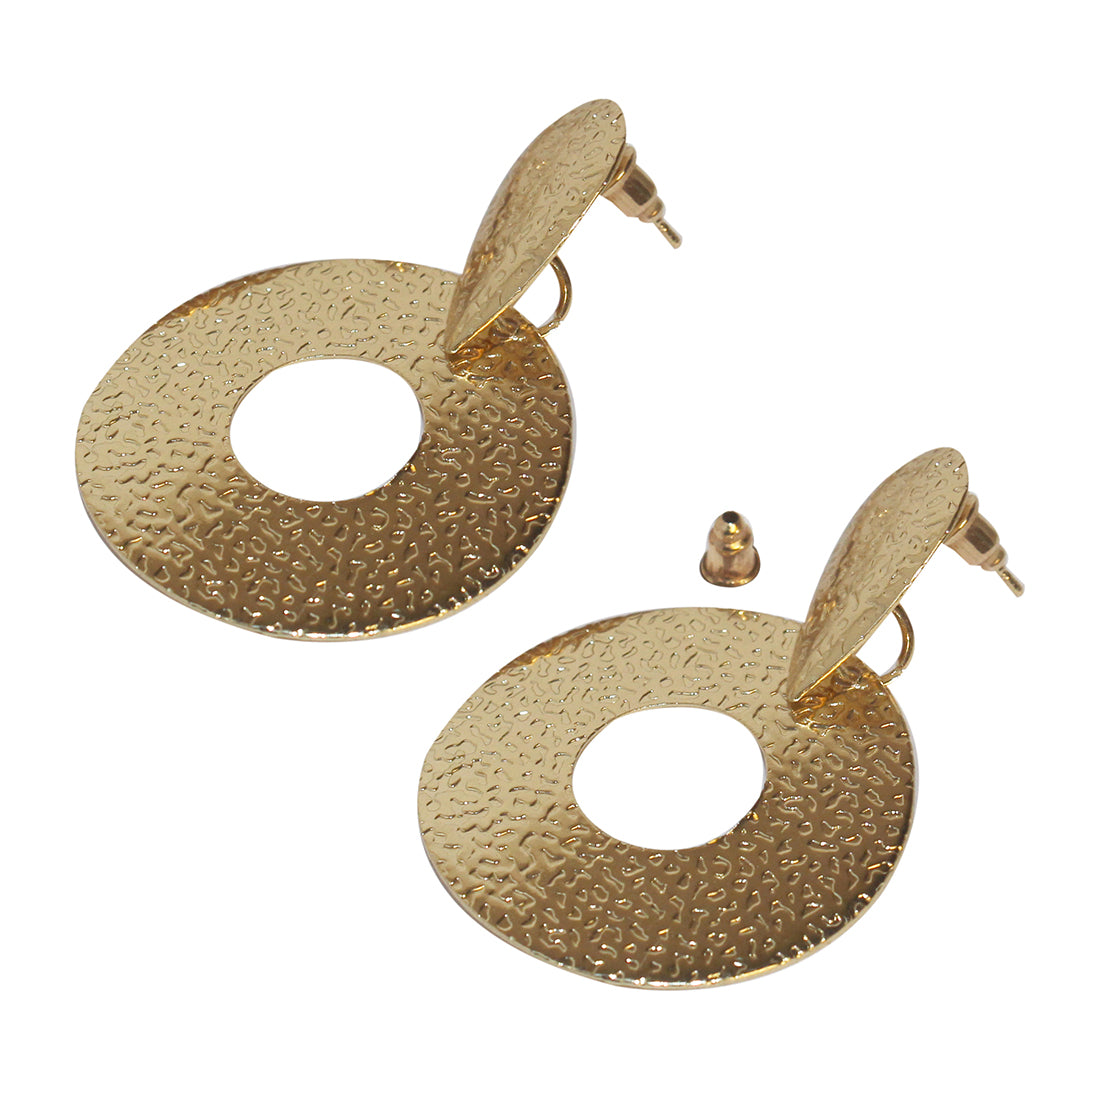 CONTEMPORARY OVERSIZED TEXTURED GOLD-TONED CIRCULAR DROP EARRINGS